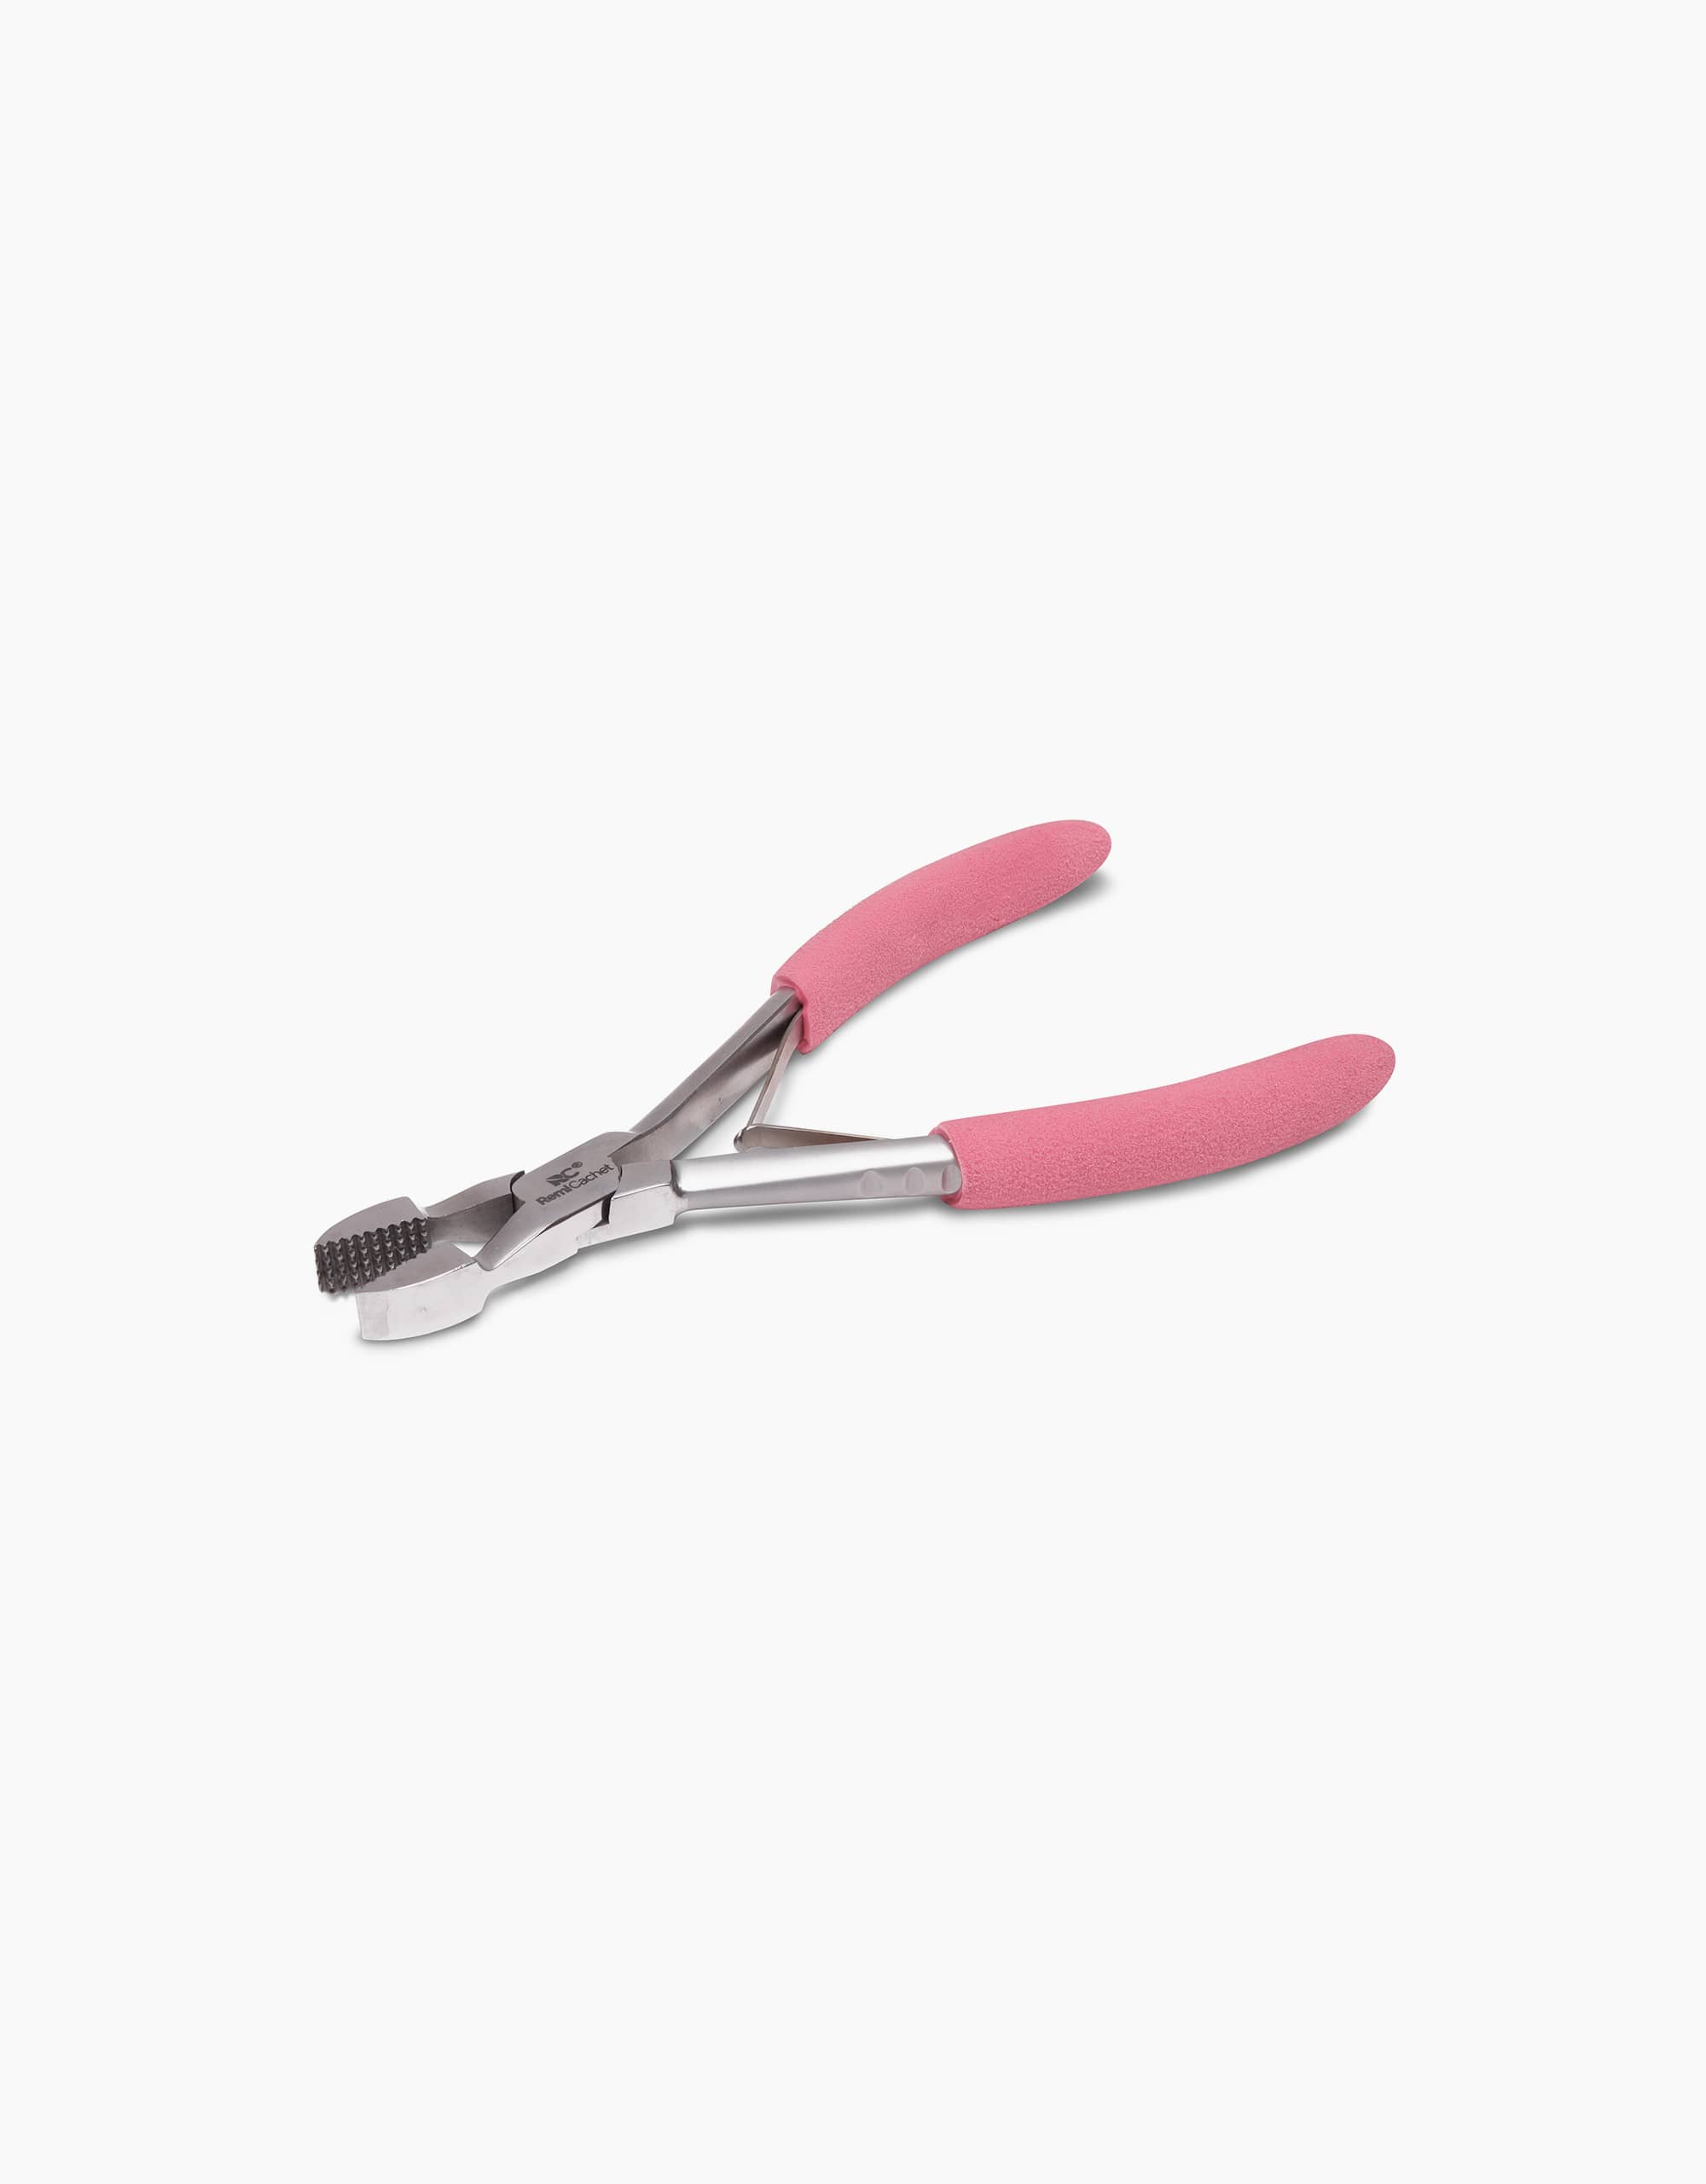 Pro Removal Pliers